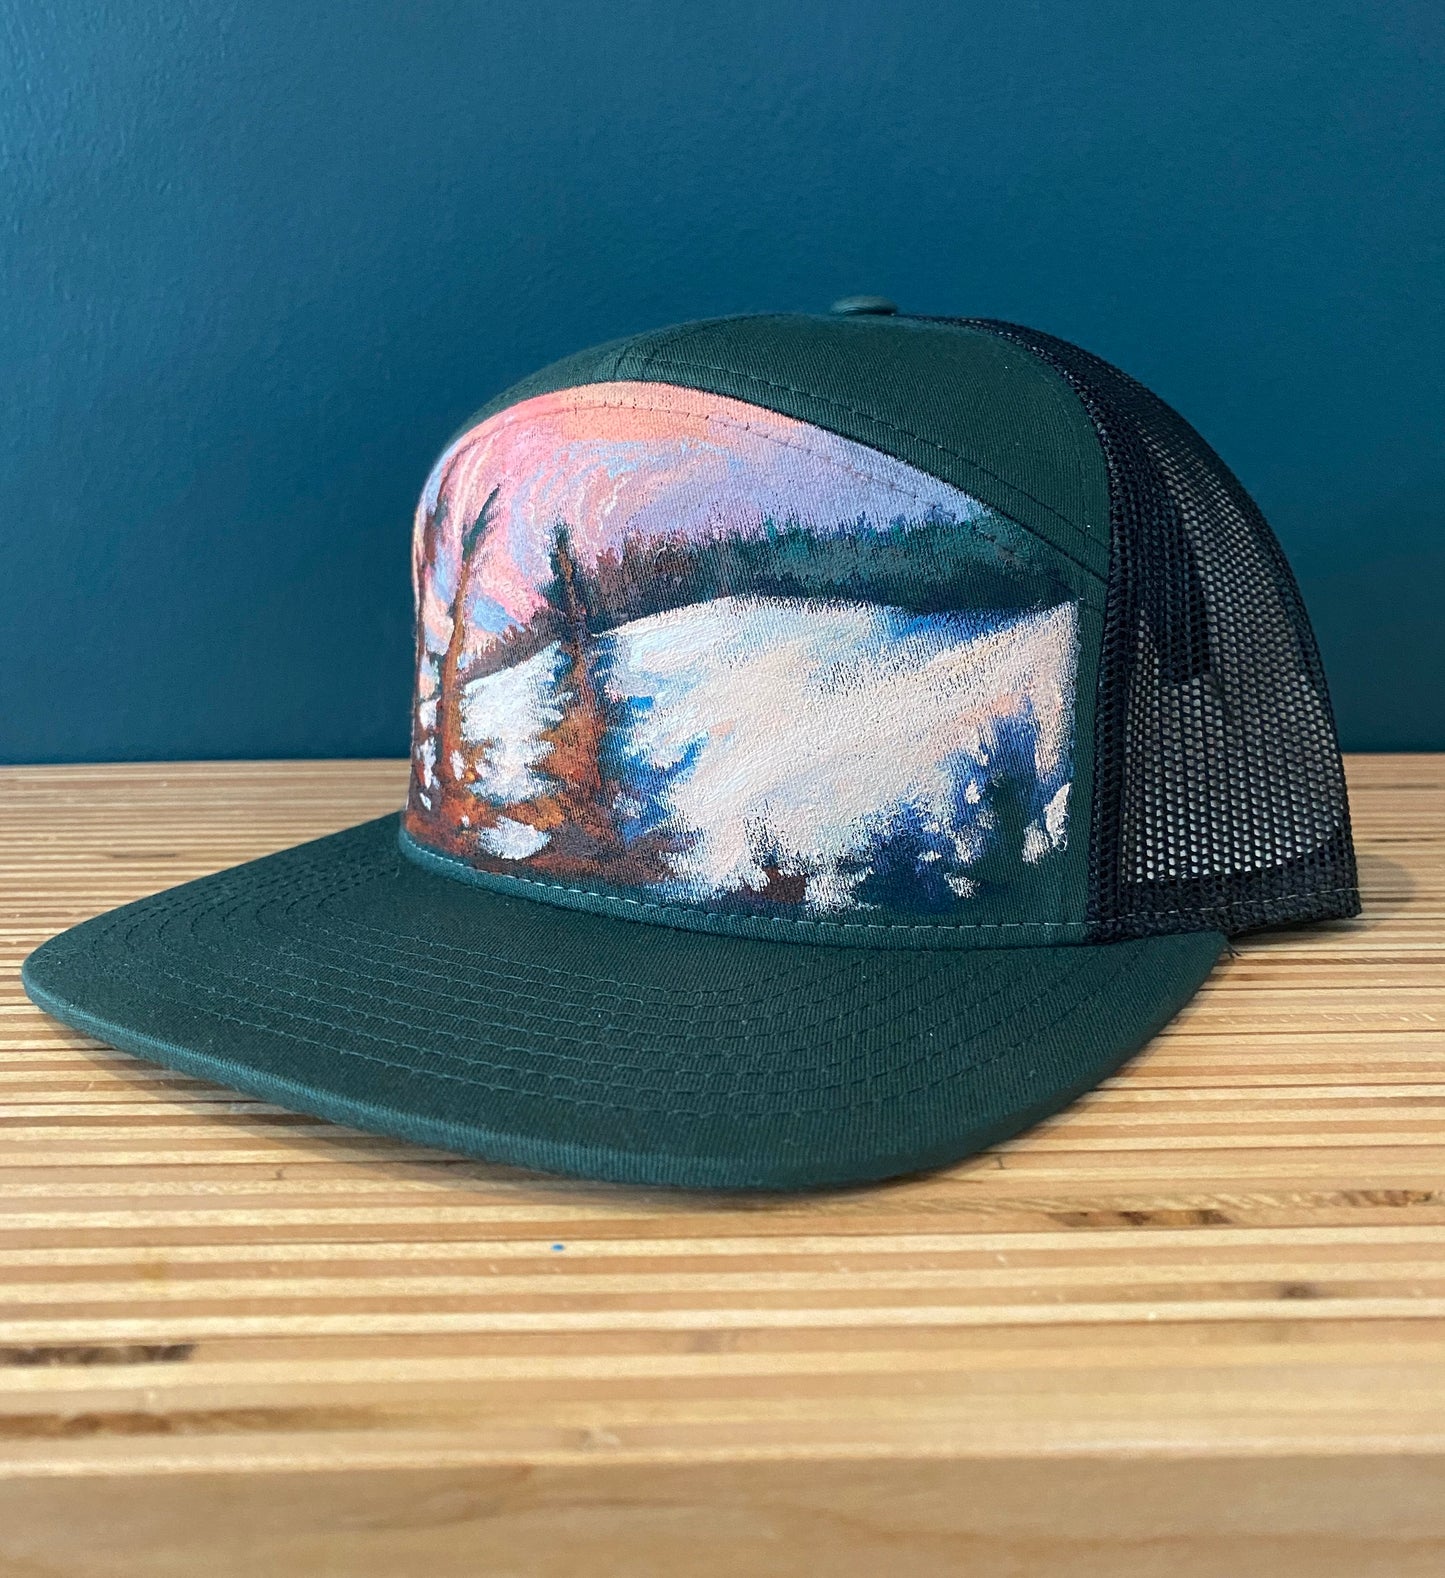 "Snowy Hills" Hand Painted Hat